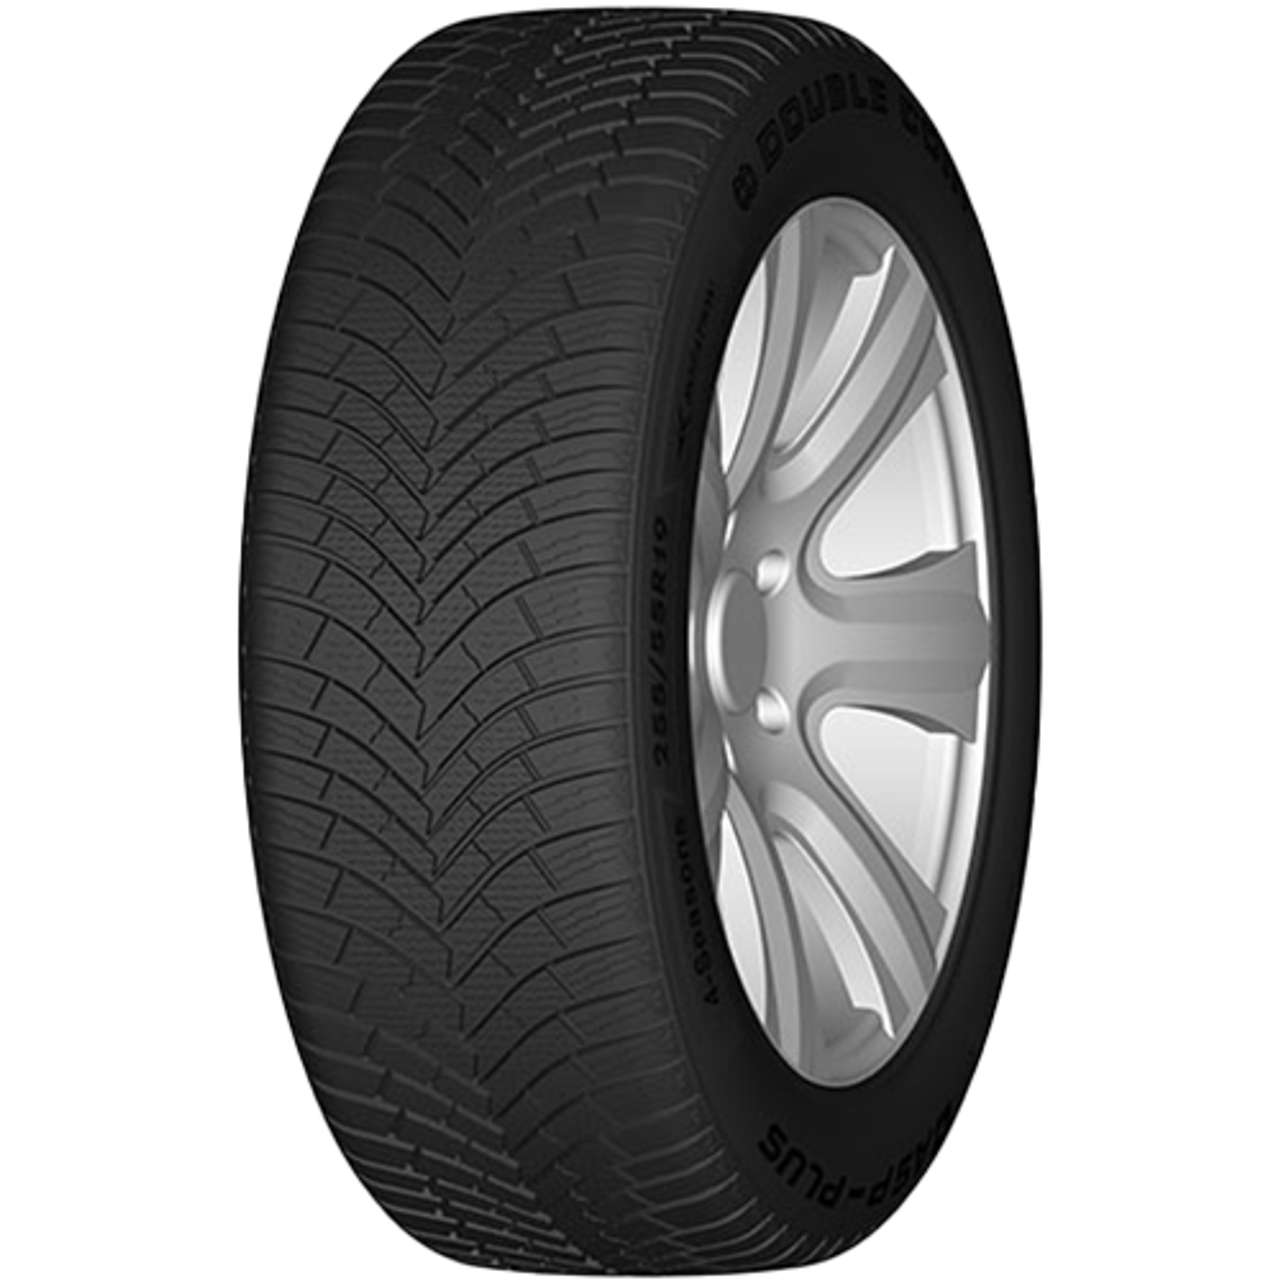 DOUBLE COIN DASP+ 195/65R15 95V BSW XL